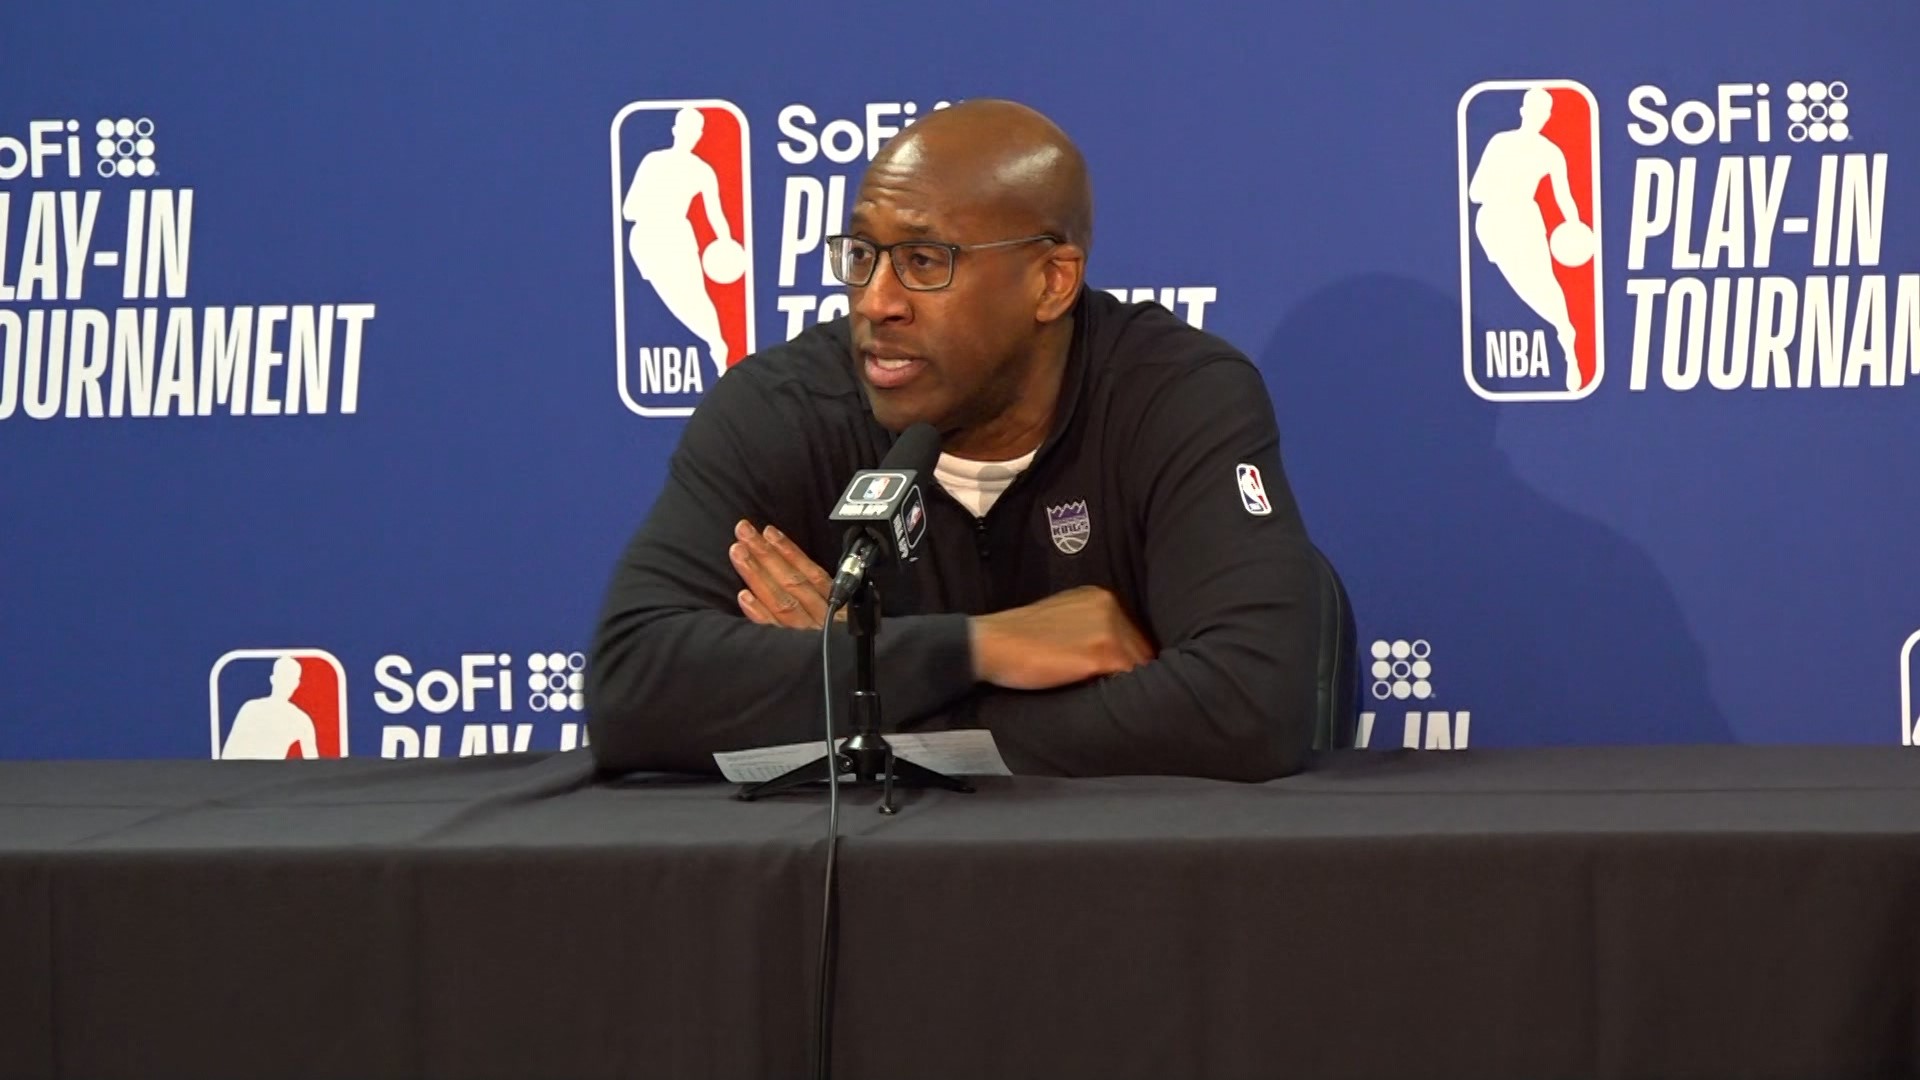 Mike Brown gives insight into what went wrong against the New Orleans Pelicans | Post-game interview